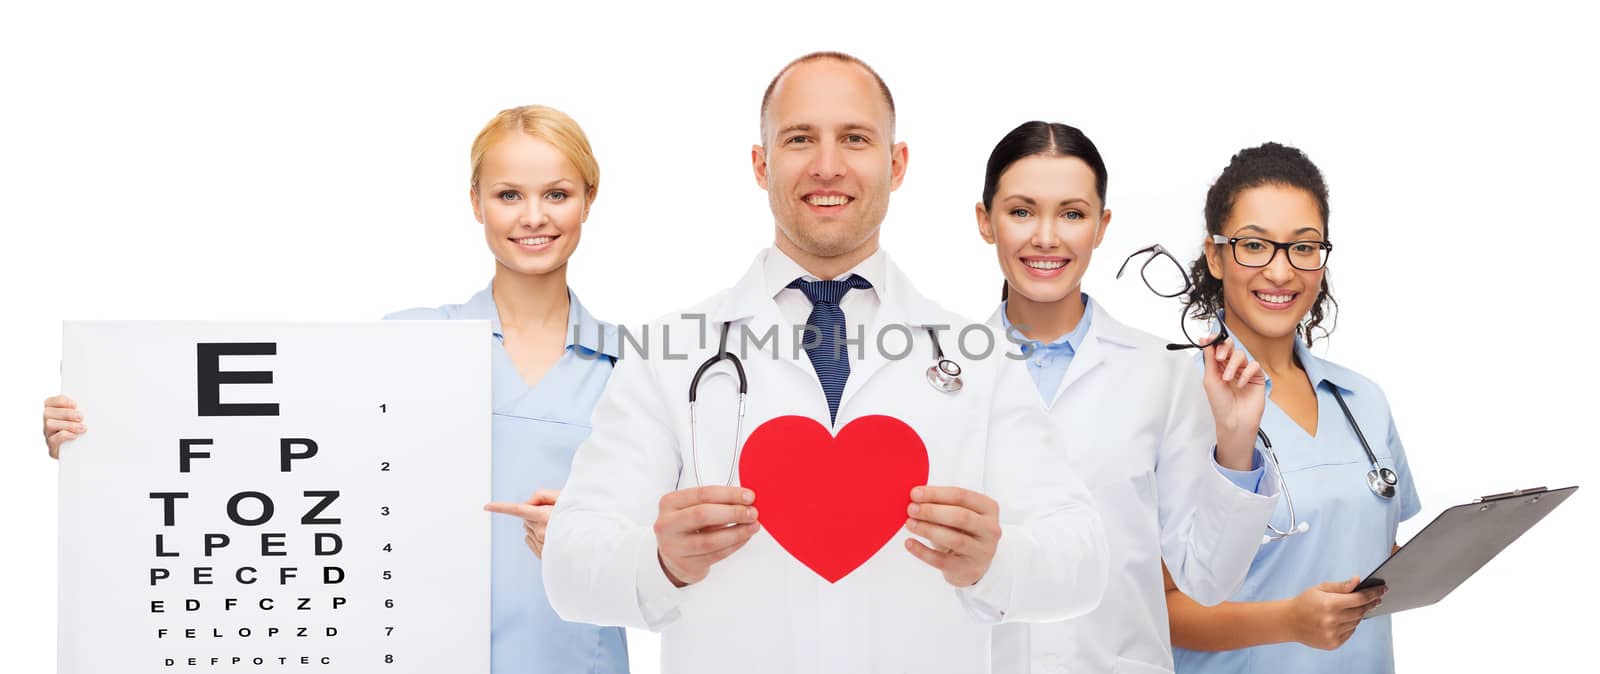 group of smiling doctors with red heart shape by dolgachov